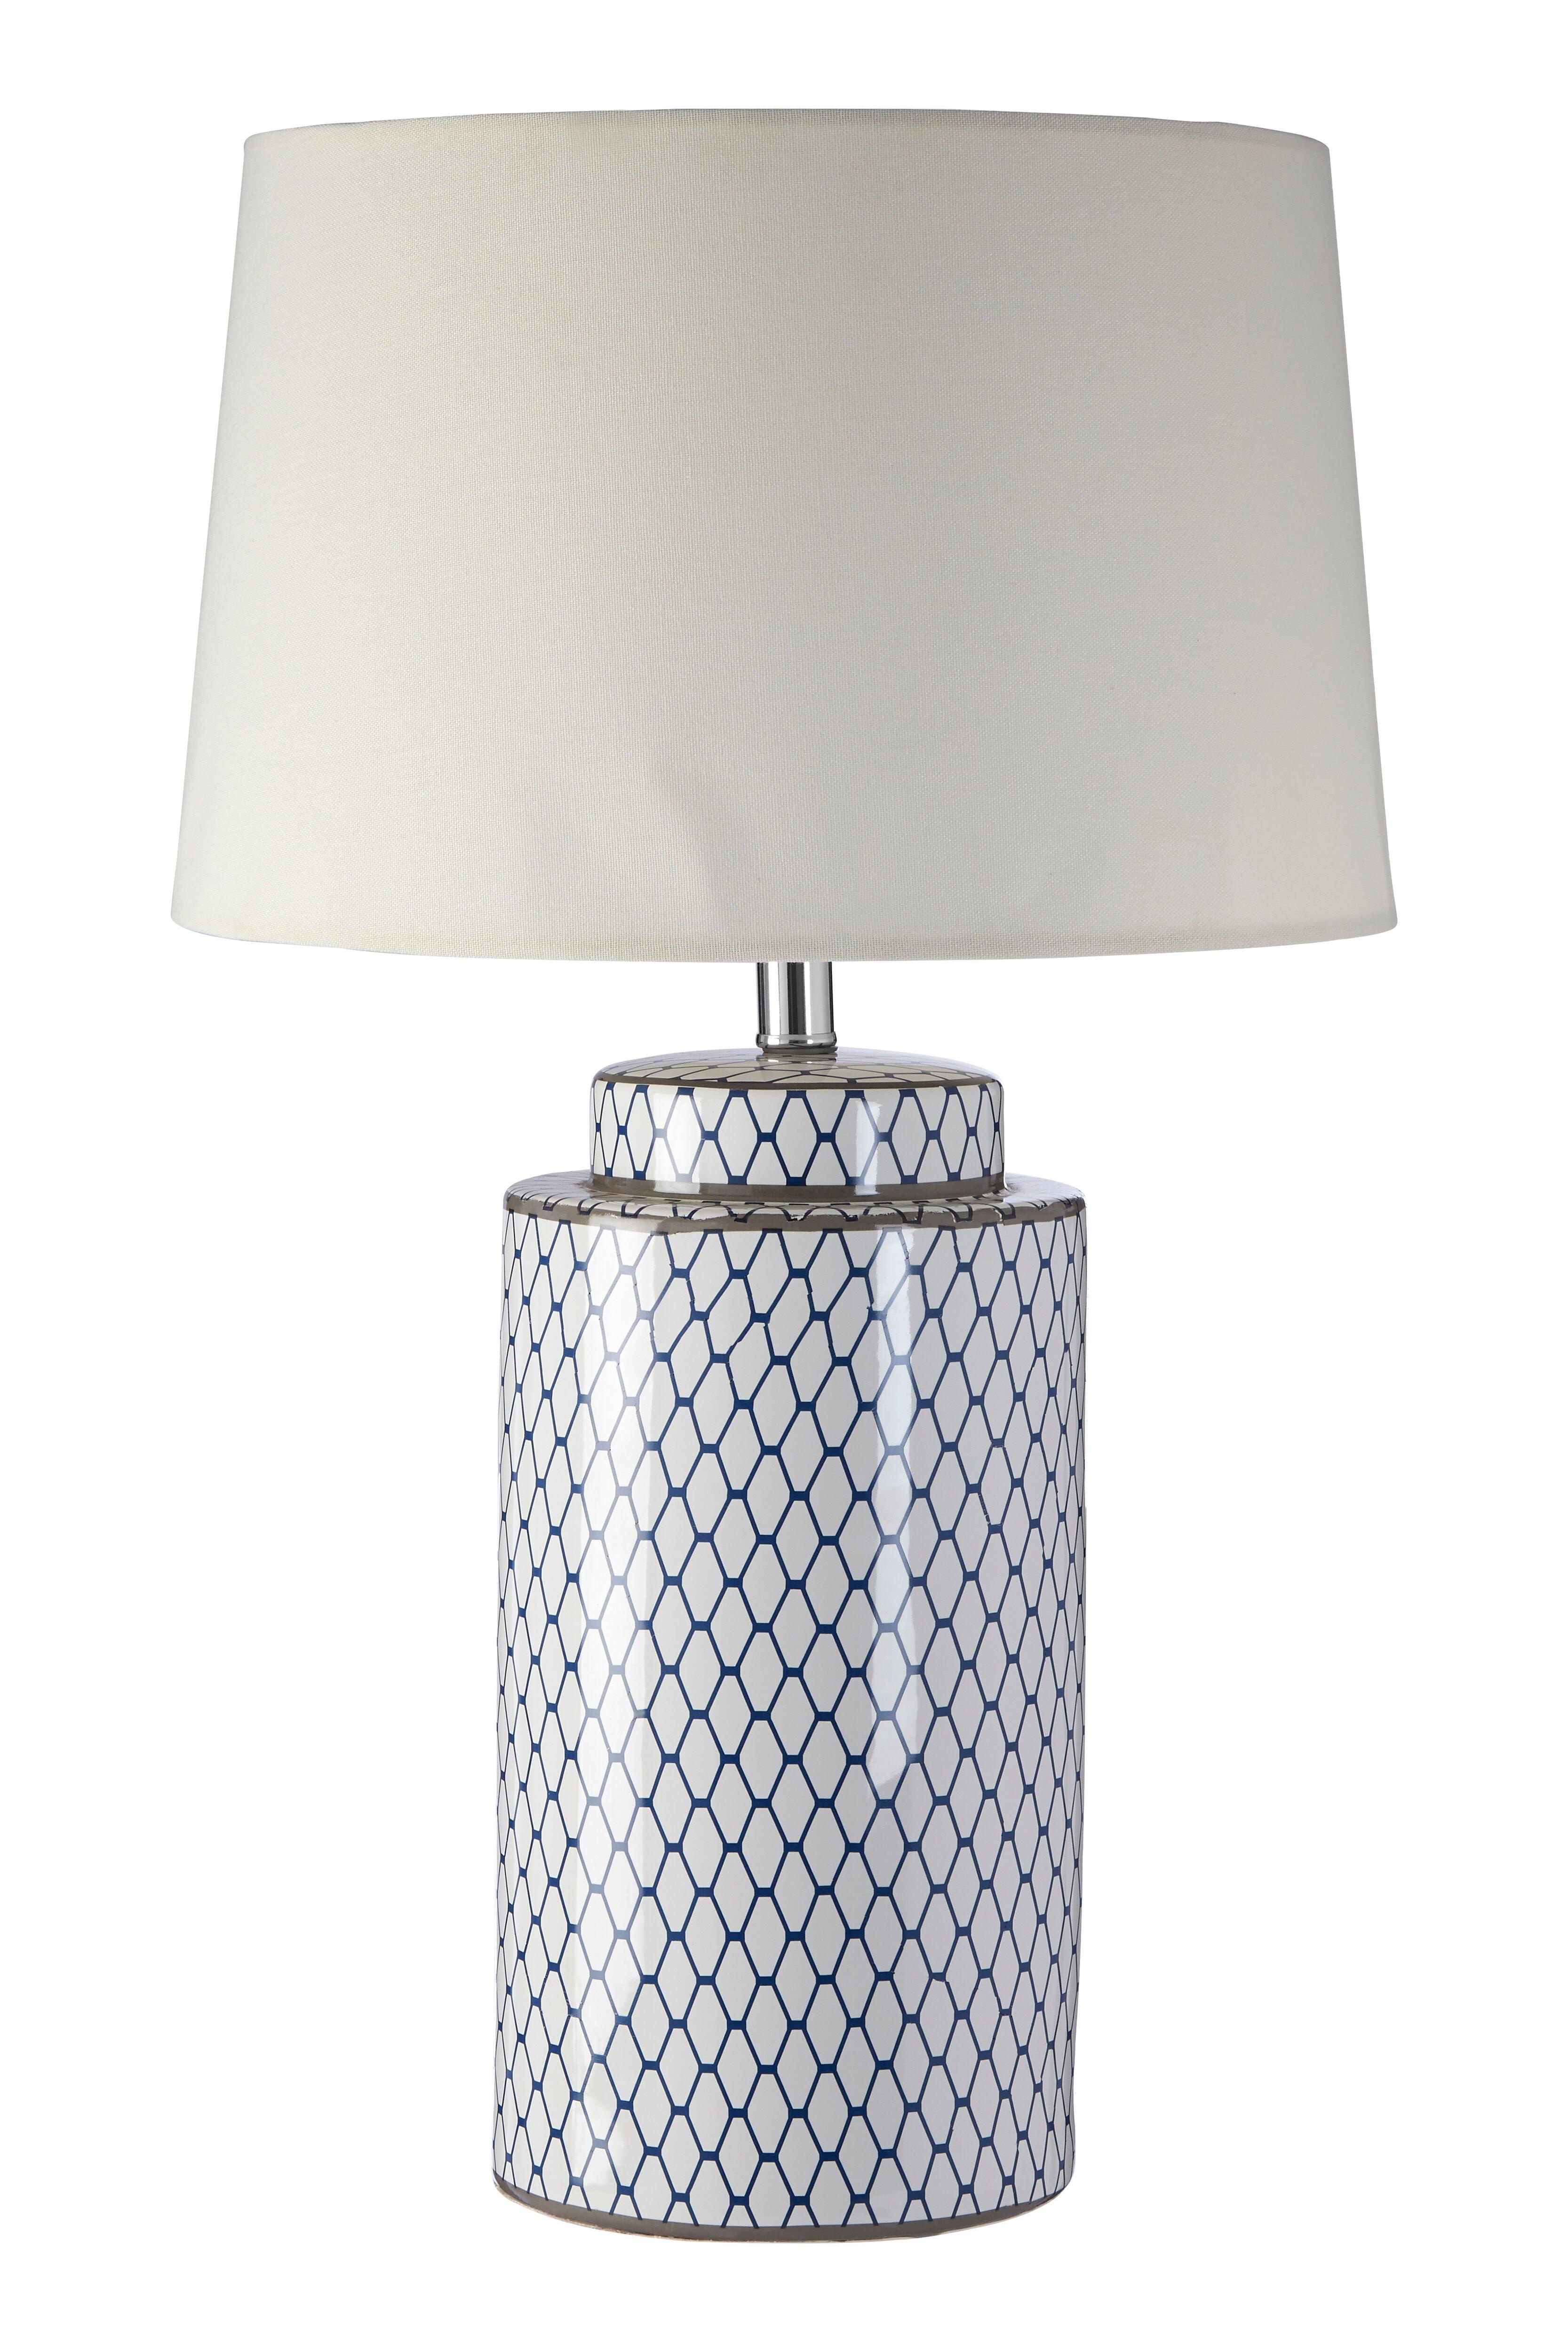 Interiors by Premier Sorino Ceramic Table Lamp With Cream Shade